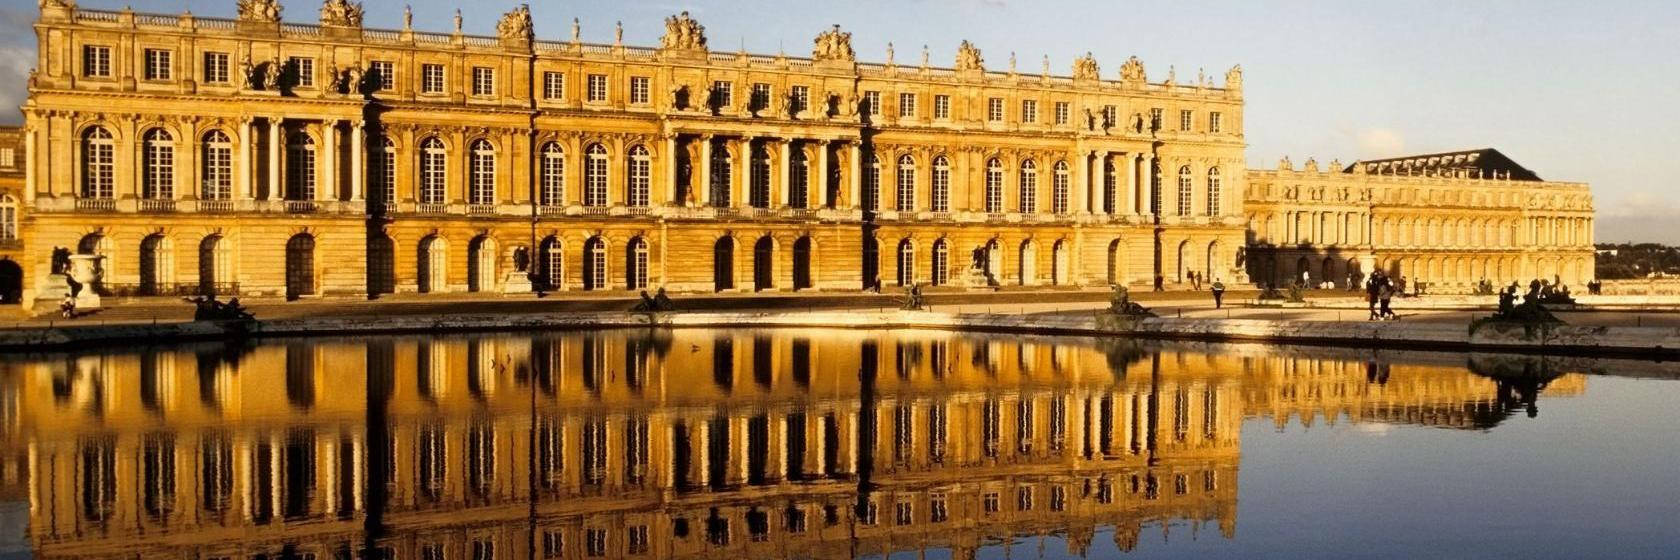 Majestic View Of The Pool Near The Palace Of Versailles Background